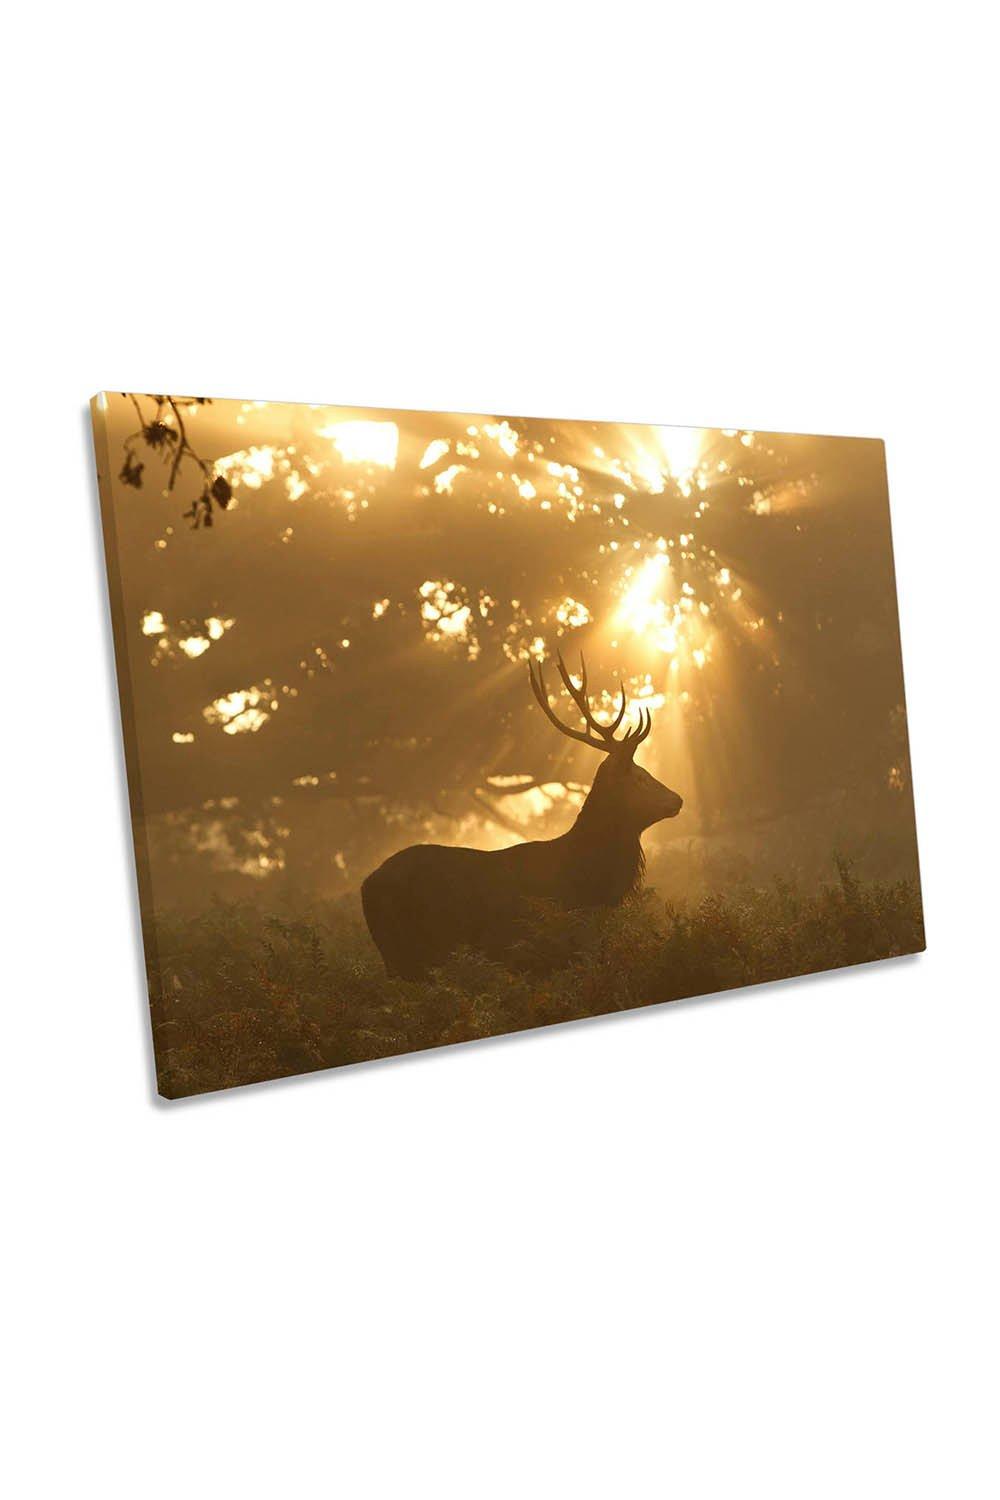 Ghost of the Forest Stag Deer Sunset Canvas Wall Art Picture Print